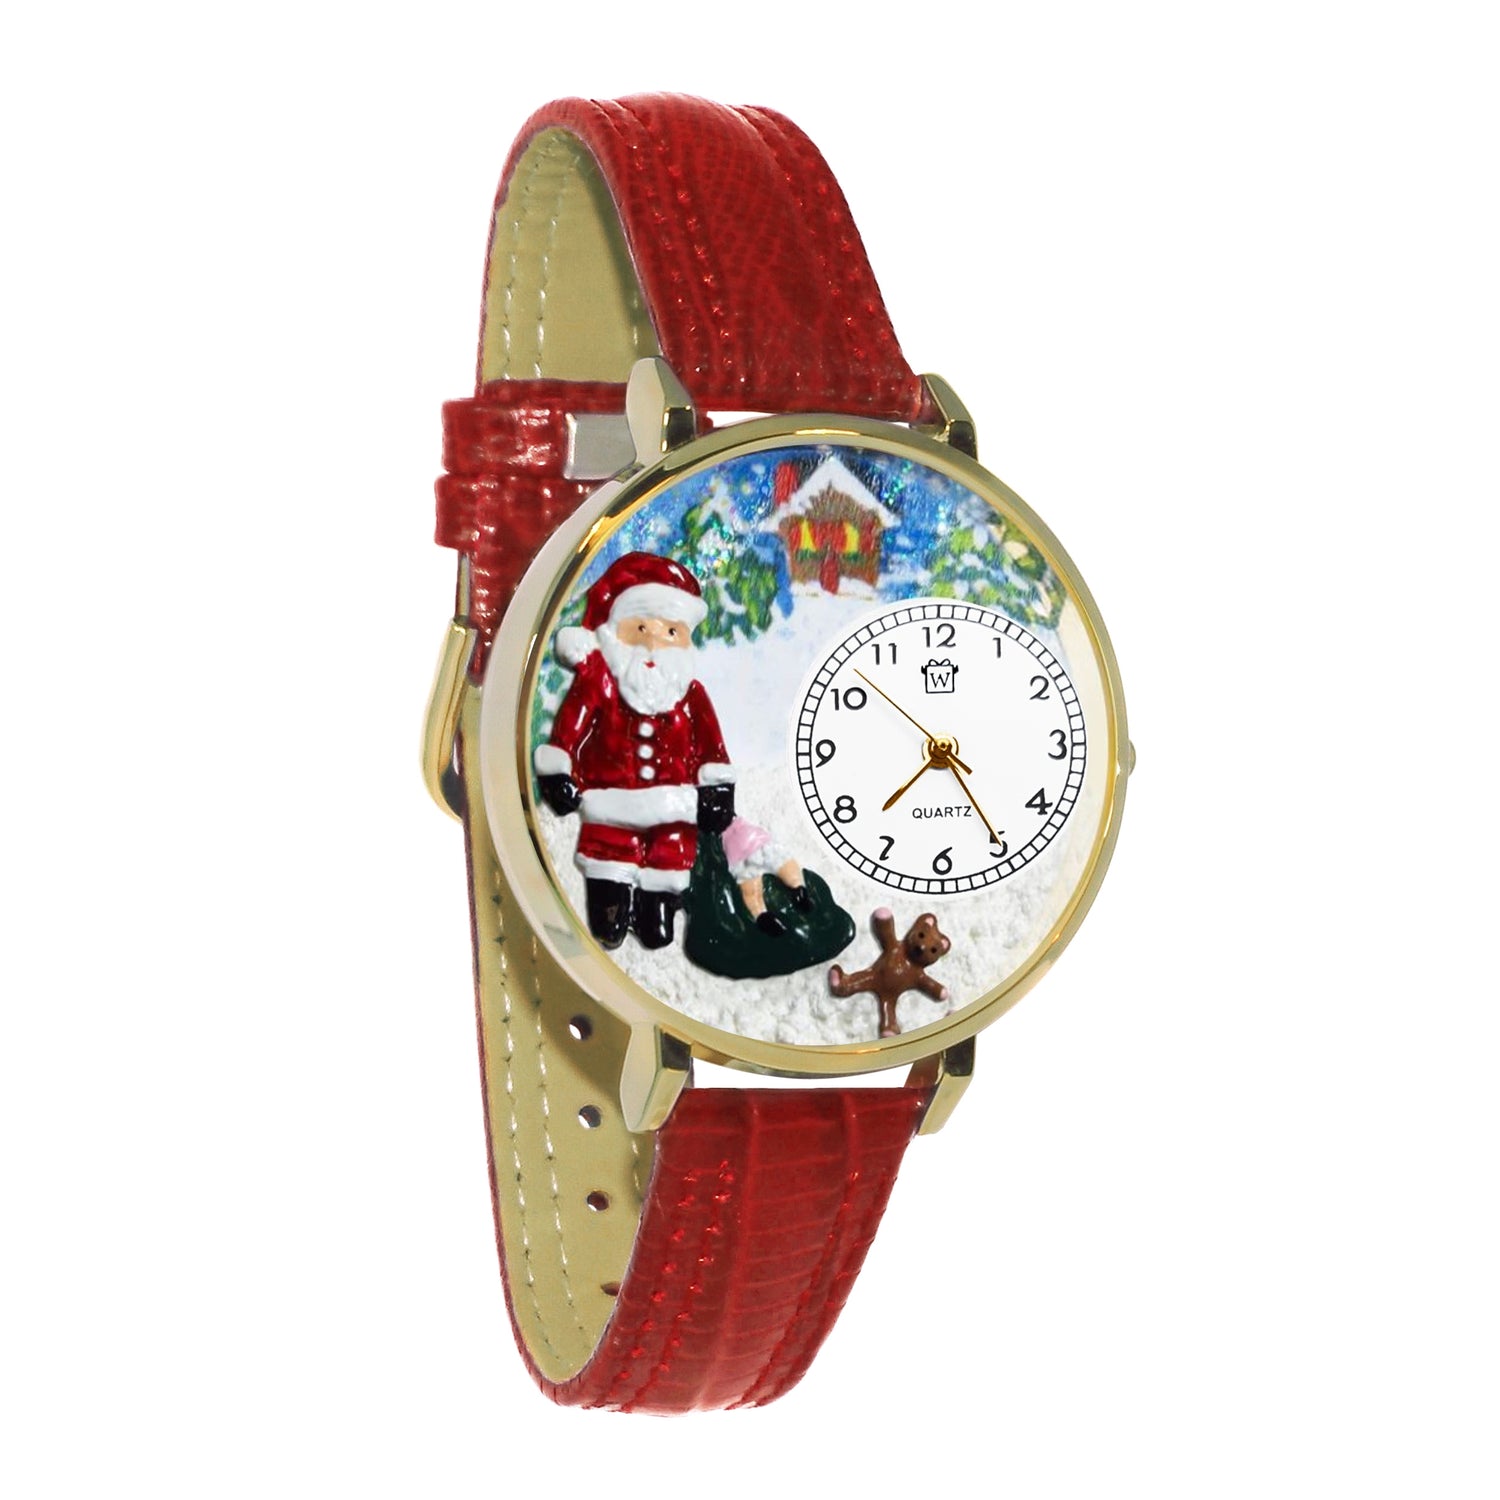 Whimsical Gifts | Santa Claus 3D Watch Large Style | Handmade in USA | Holiday & Seasonal Themed | Christmas | Novelty Unique Fun Miniatures Gift | Gold Finish Red Leather Watch Band